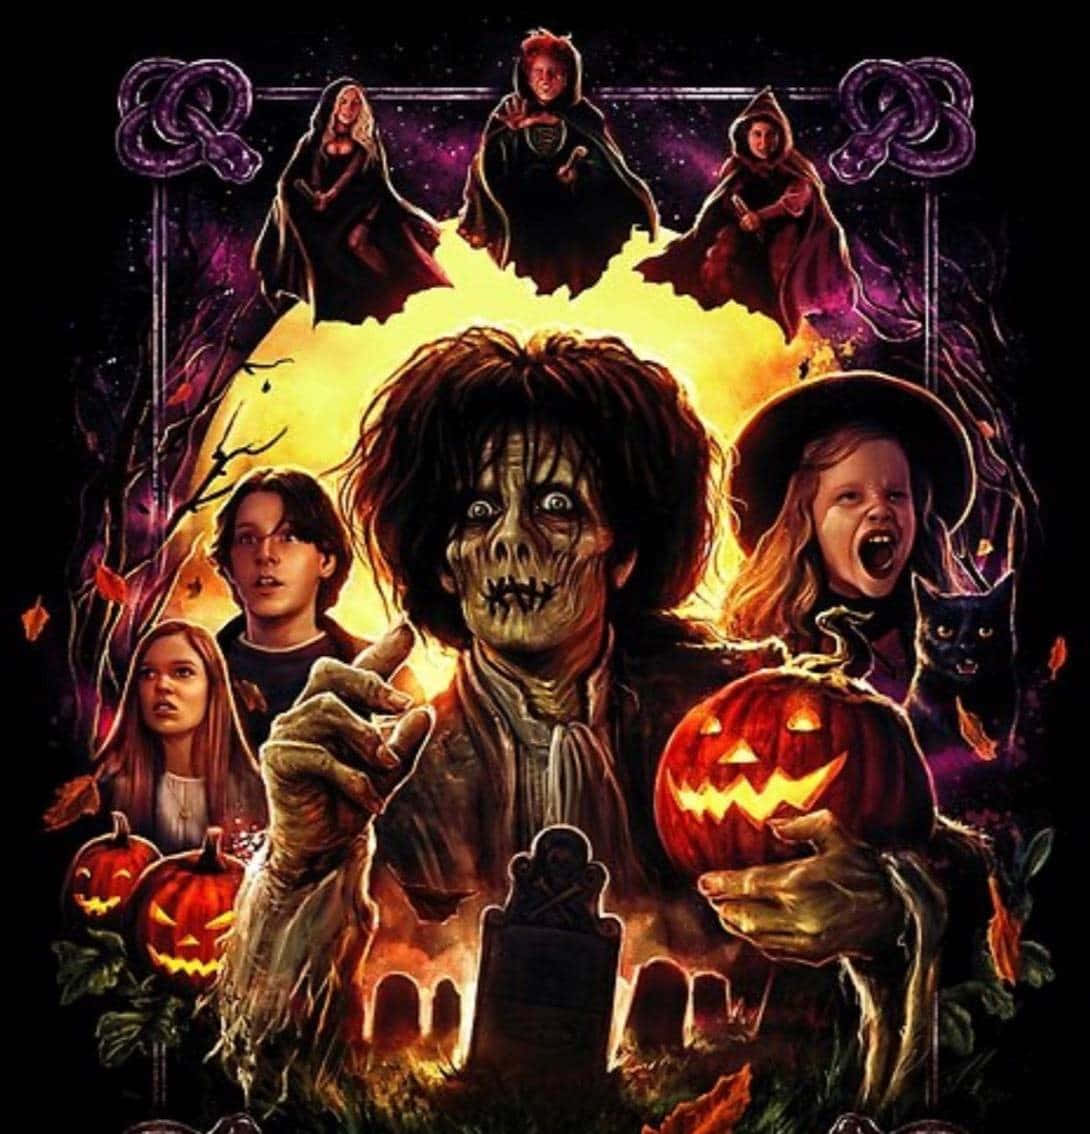 Magically Stand Out with the Hocus Pocus Iphone Wallpaper